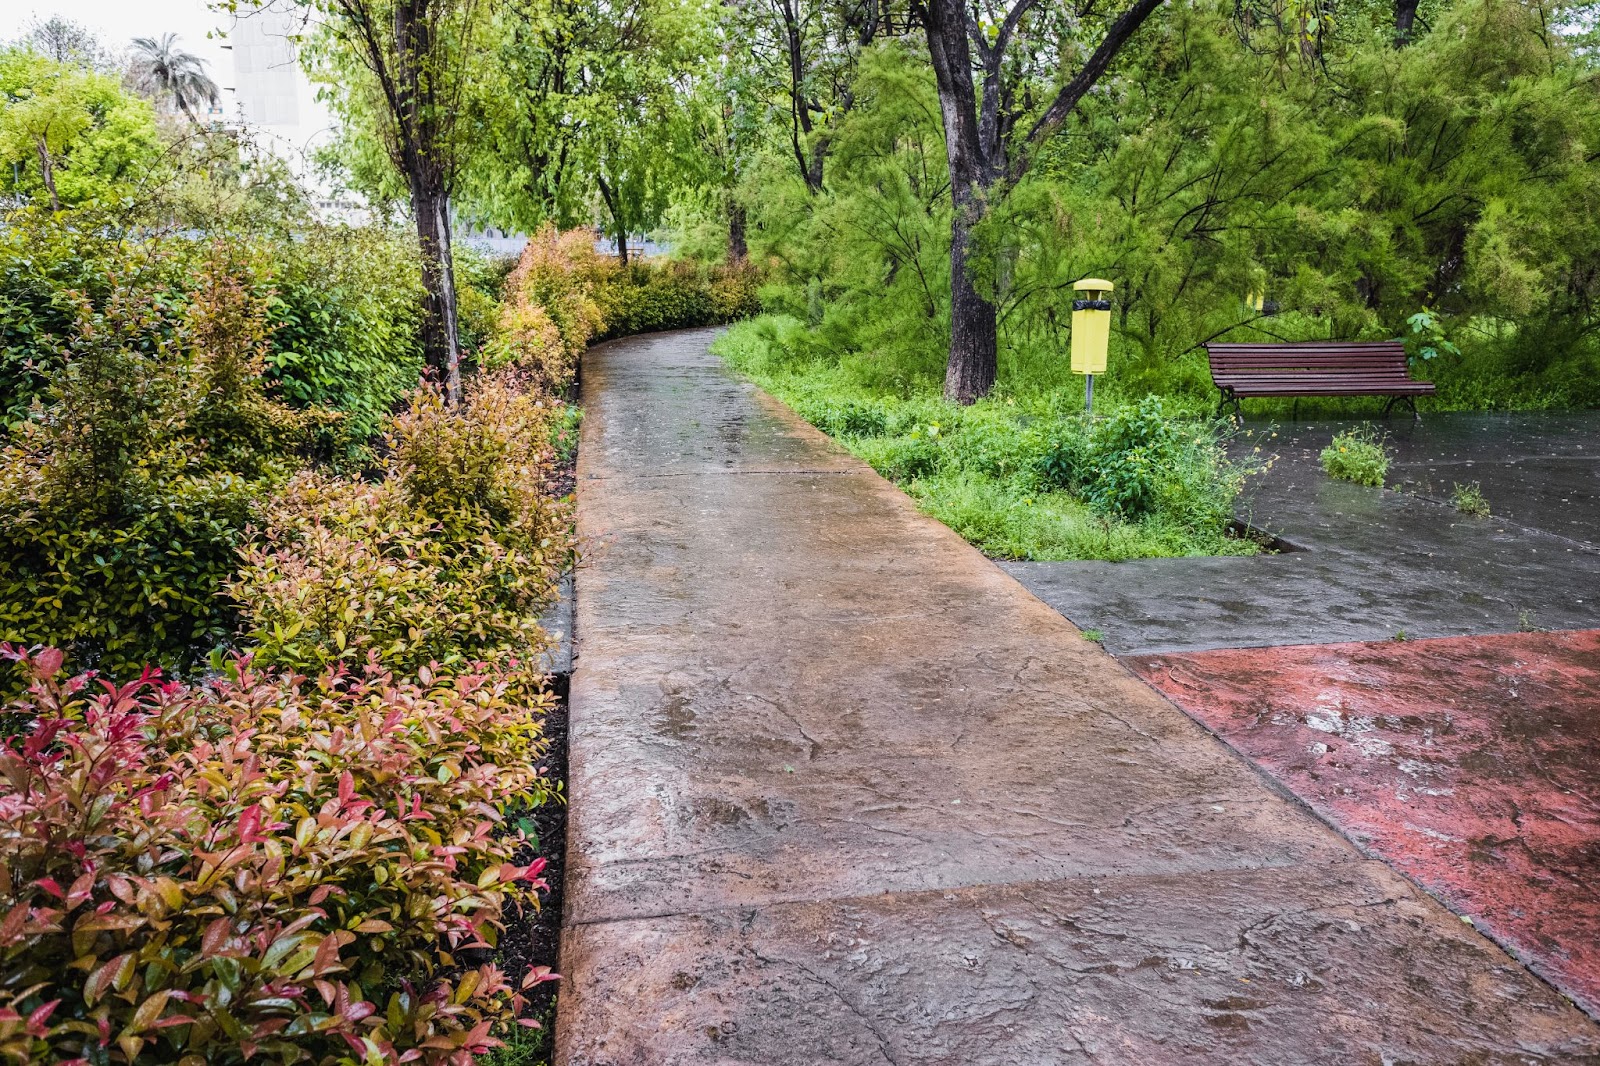 A glossy, wet sidewalk winds through a flower-filled urban park, glistening after a solitary rainy day.